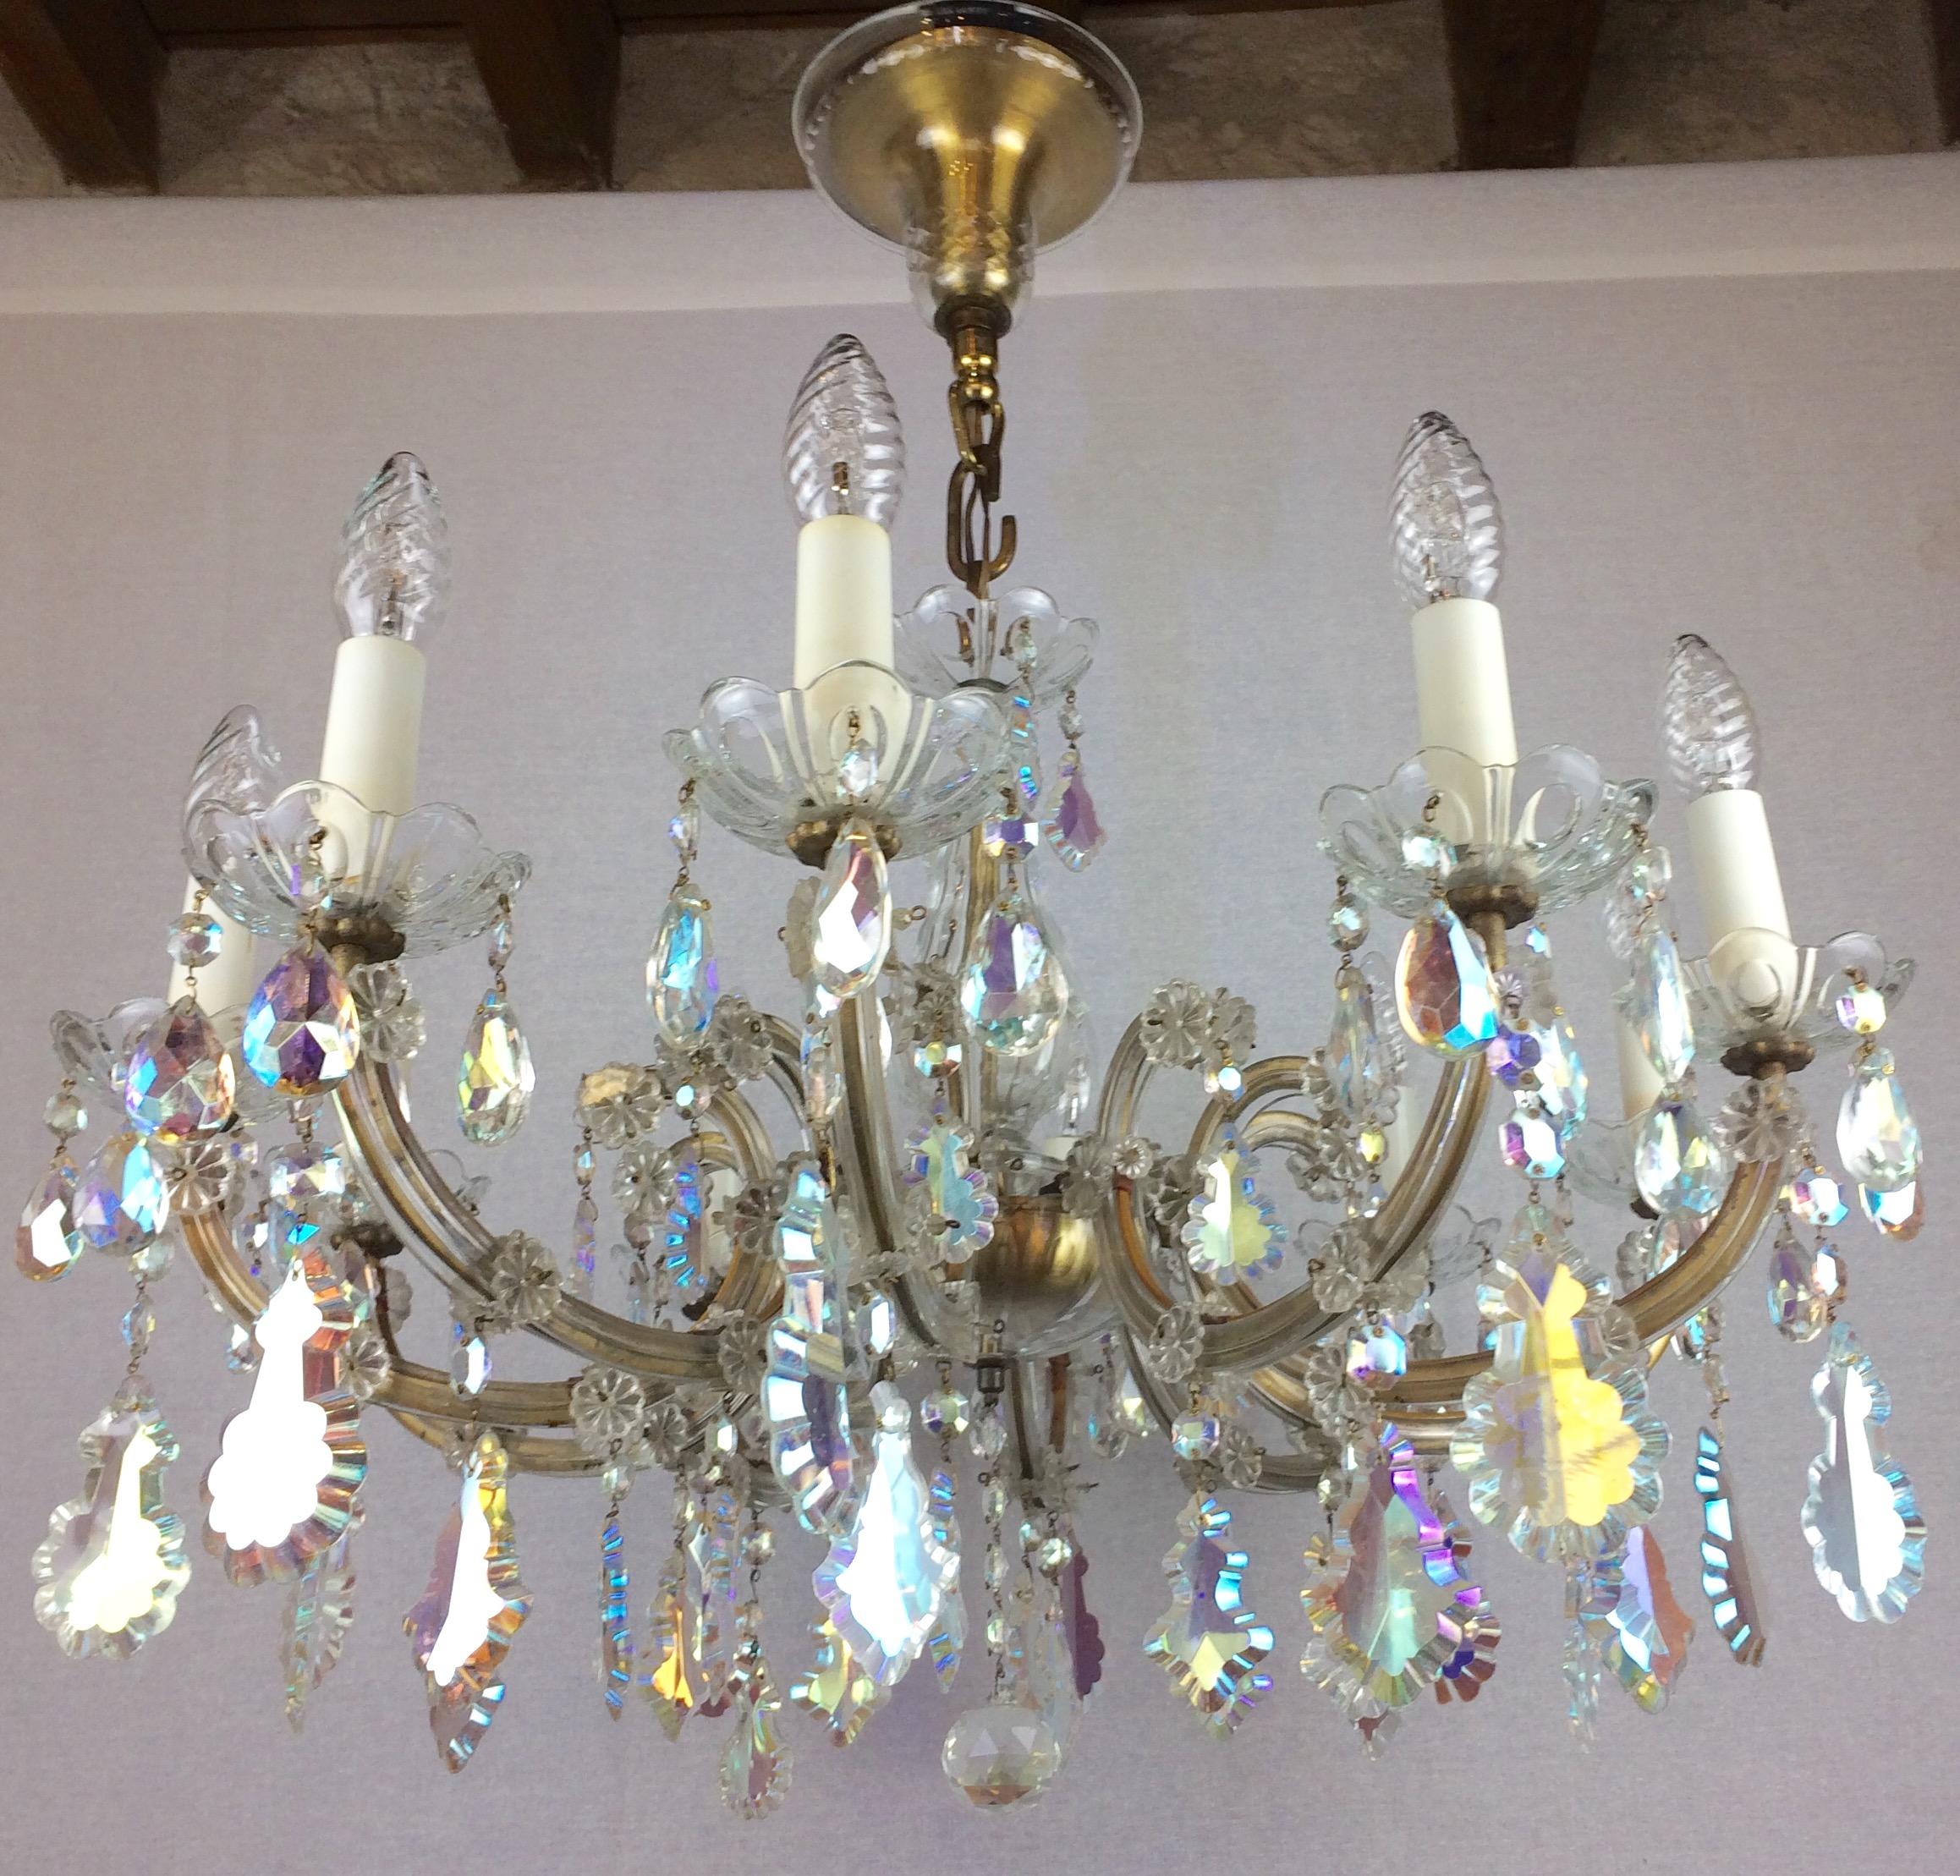 A stunning 10 arm chandelier fully arranged with colored rock crystals and drops. This antique chandelier is in very good condition, recently rewired. Fully decorated with various hand cut crystals that capture and reflect the light, resting in